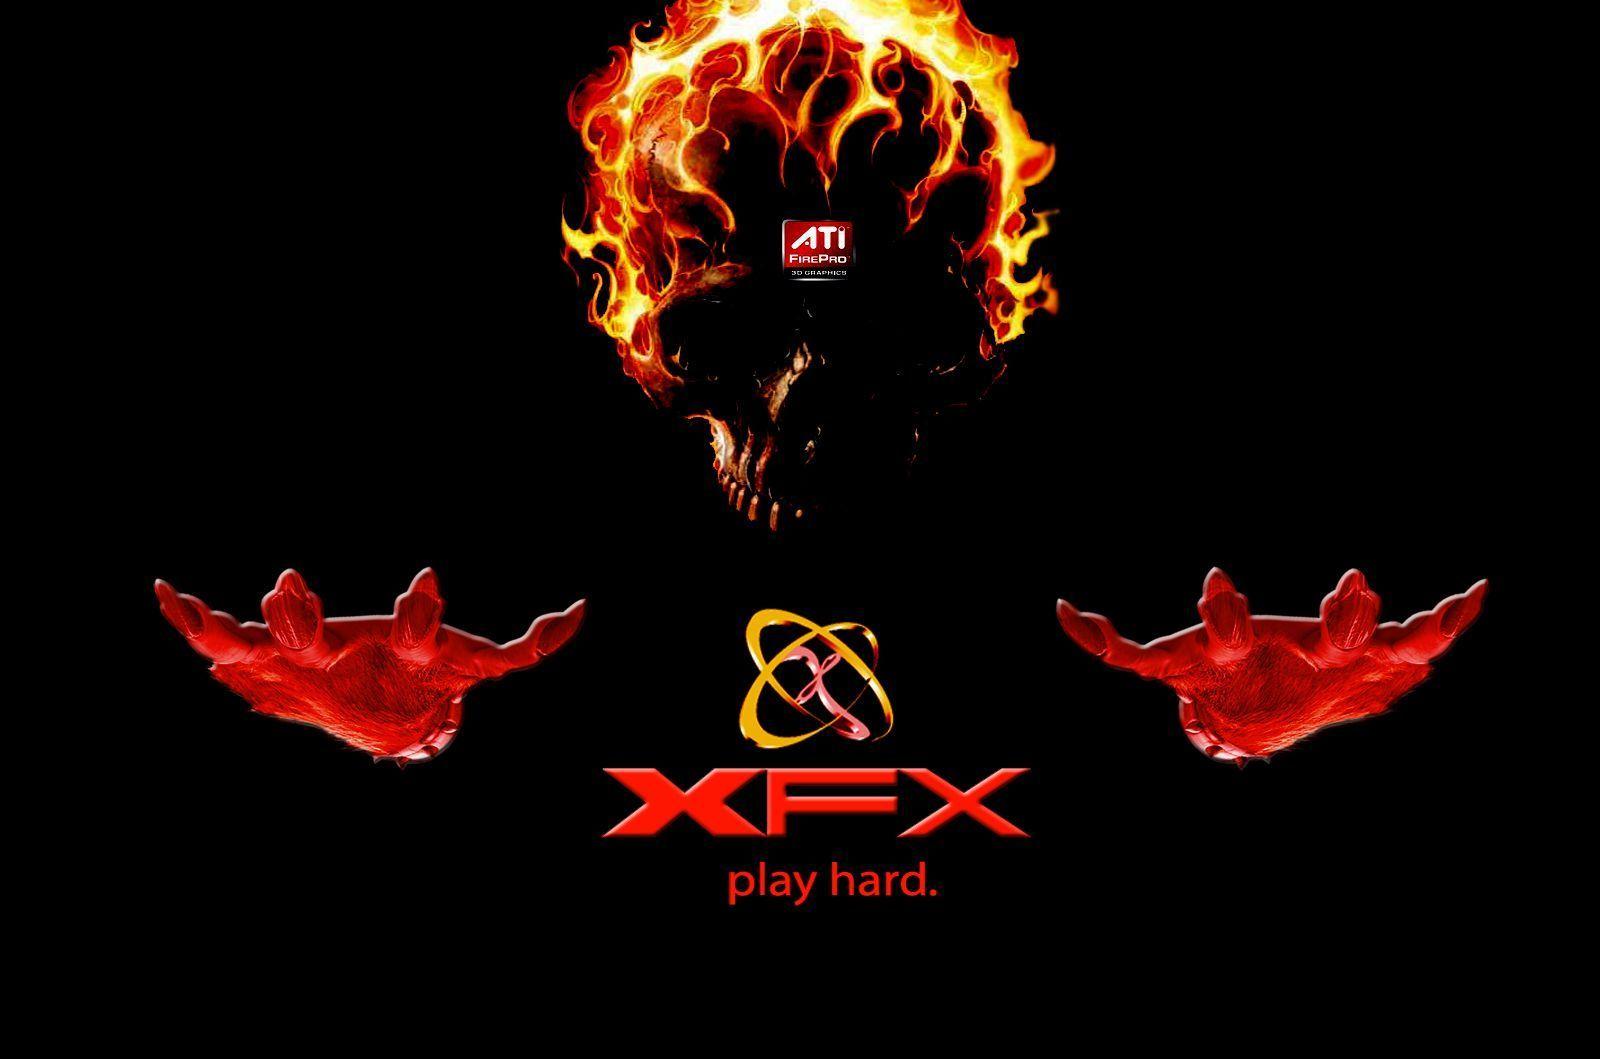 My XFX wallpaper submissions